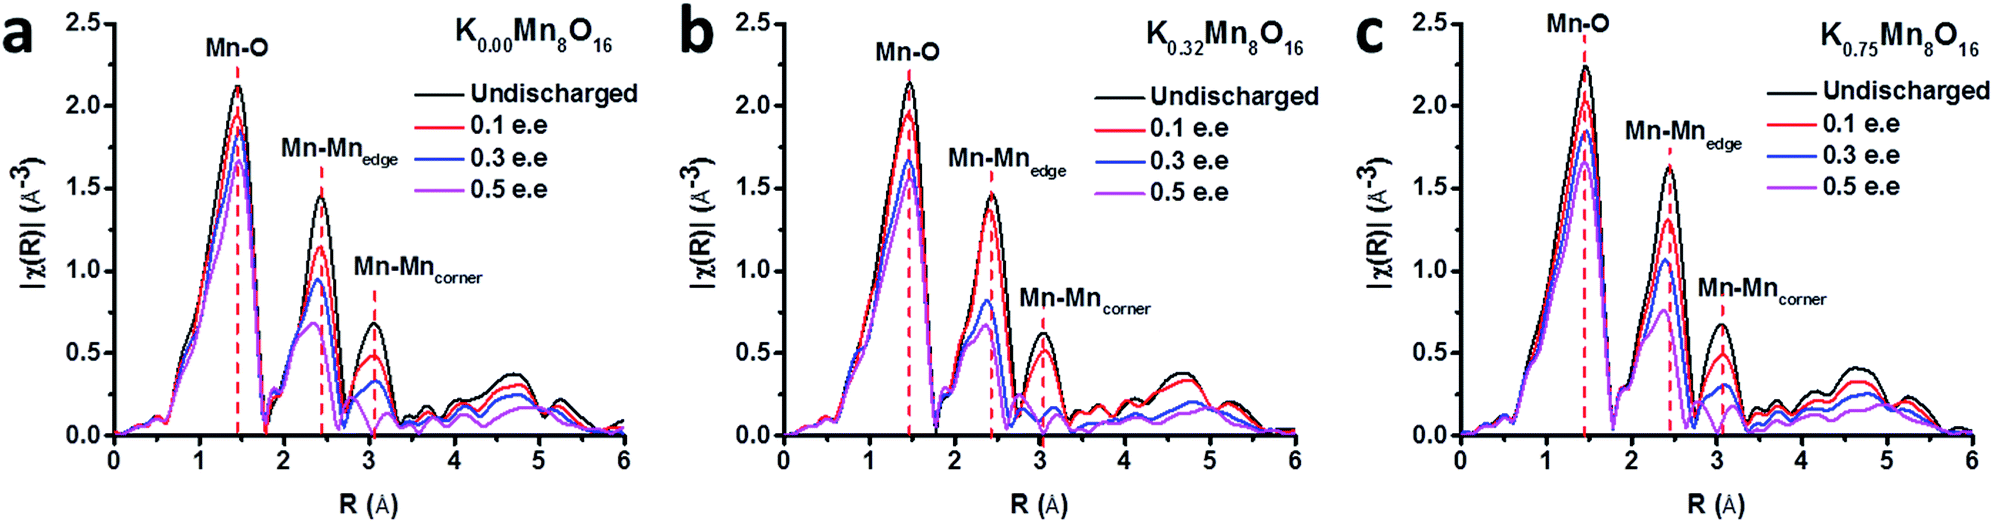 Synthesis Of Cryptomelane Type A Mno 2 K X Mn 8 O 16 Cathode Materials With Tunable K Content The Role Of Tunnel Cation Concentration On Electro Journal Of